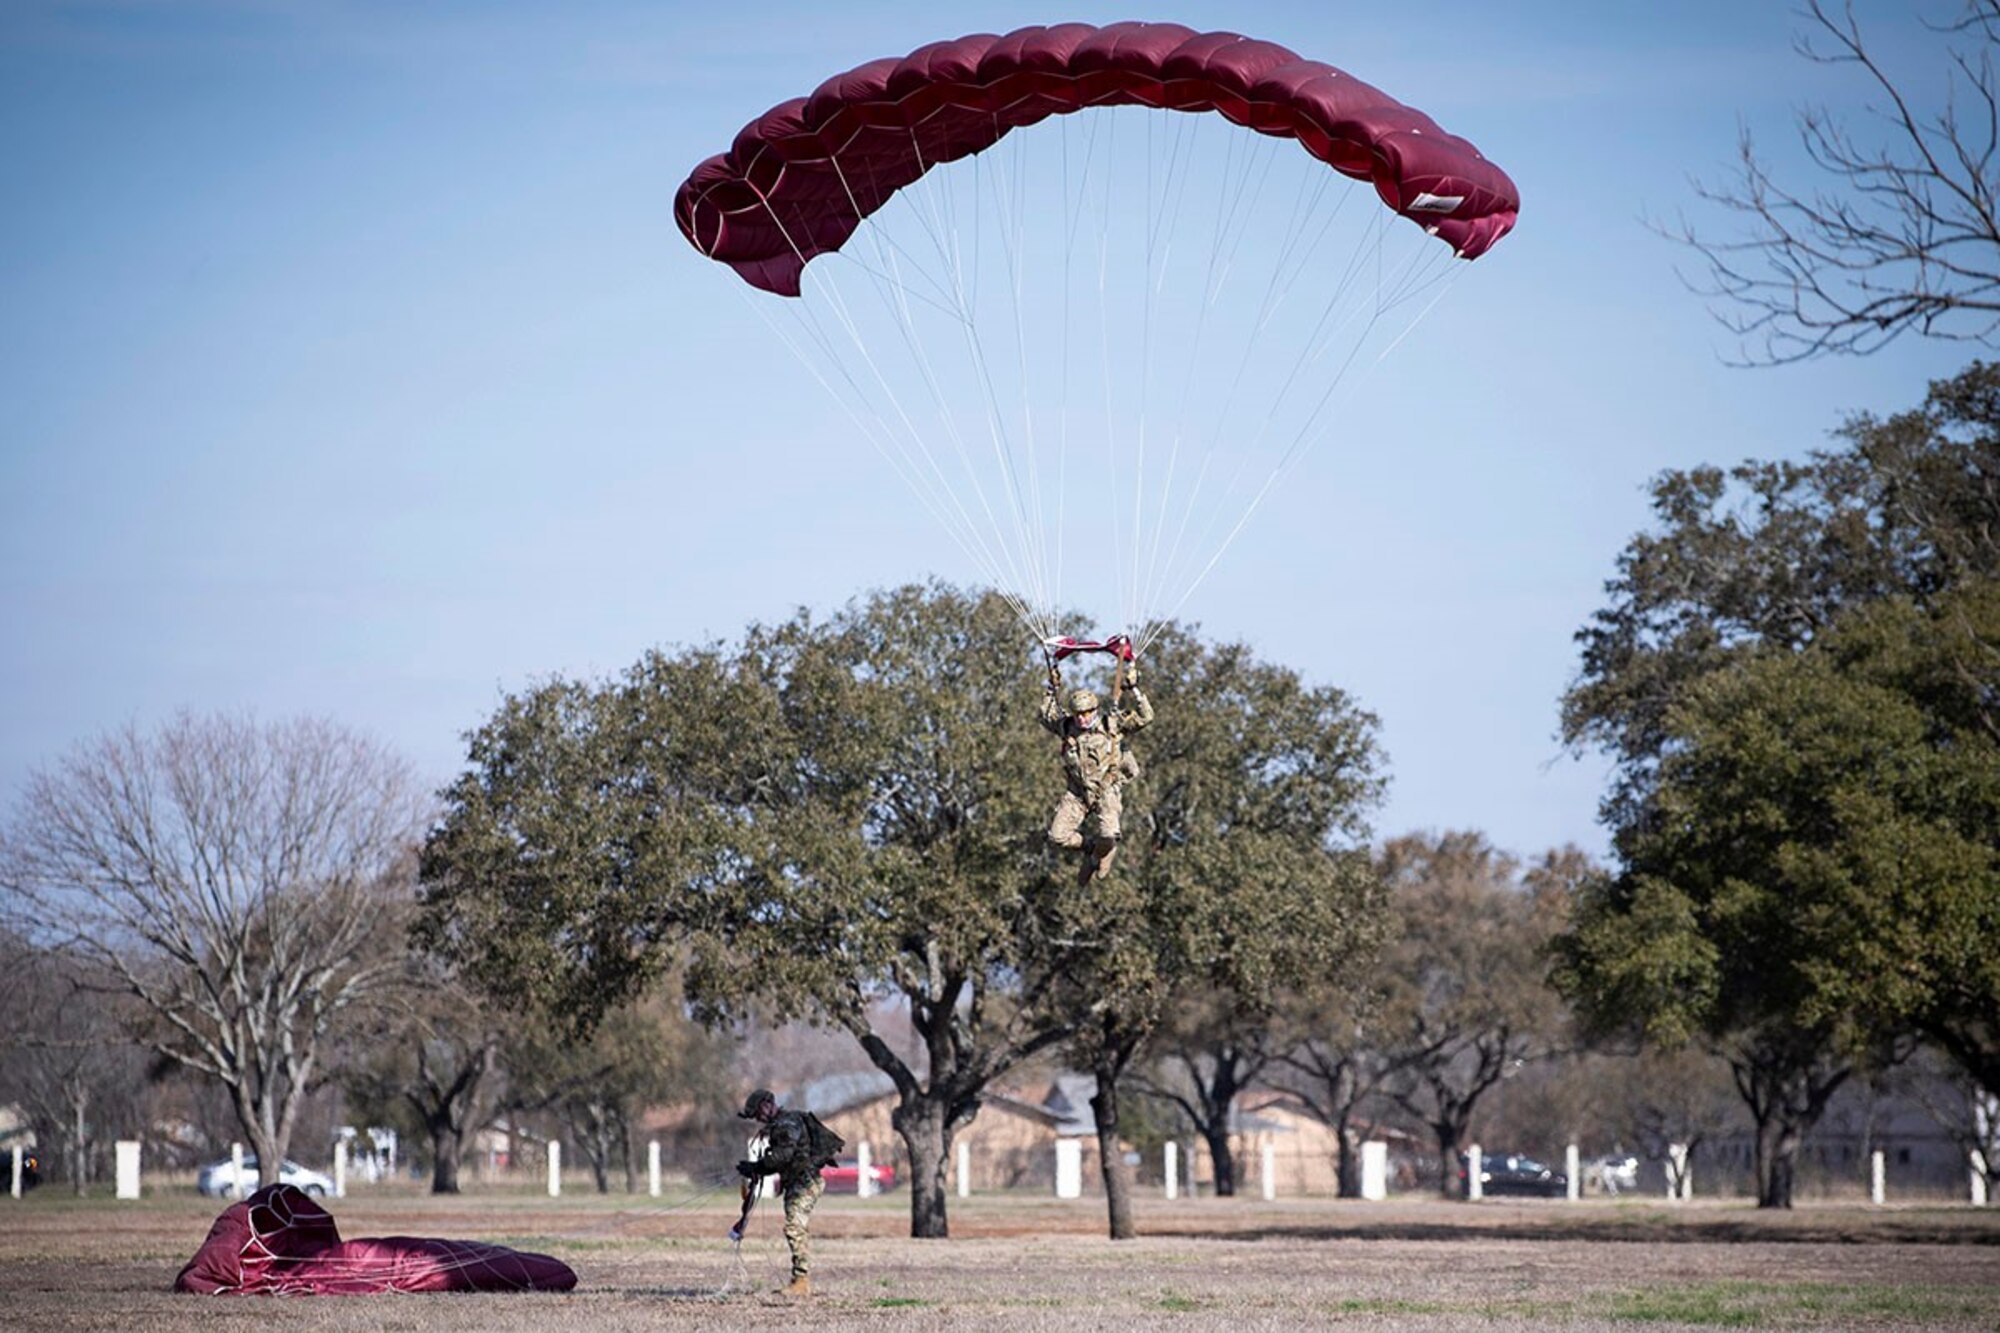 A member of the Special Warfare Training Wing prepares to land after parachuting over Airmen’s Heritage Park during a Medal of Honor plaque unveiling ceremony to honor Master Sgt. John Chapman at Joint Base San Antonio-Randolph March 4, 2021.